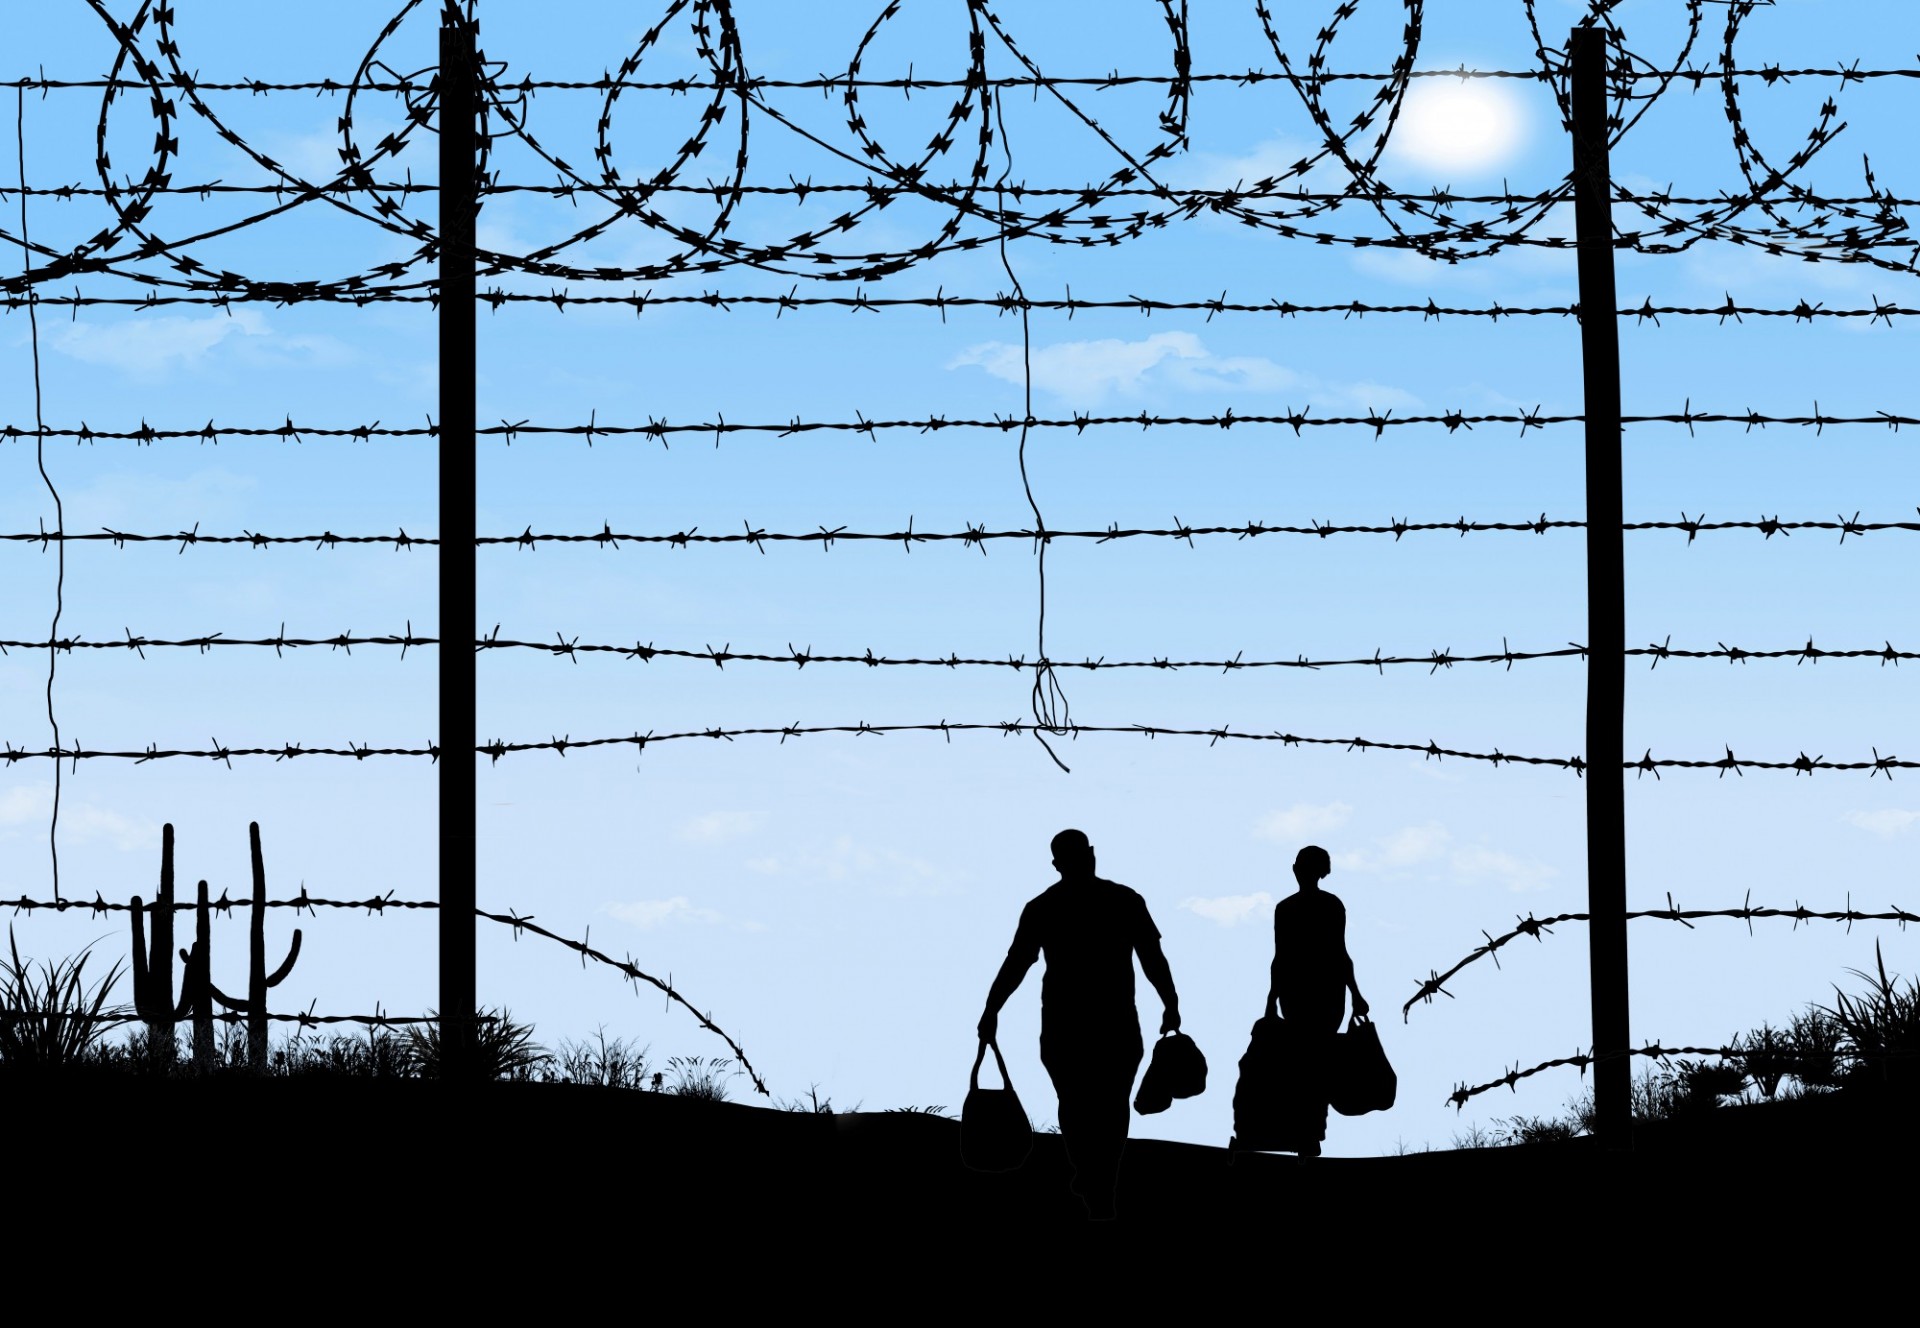 Male and female figures with suitcases crossing through an opening in a border fence